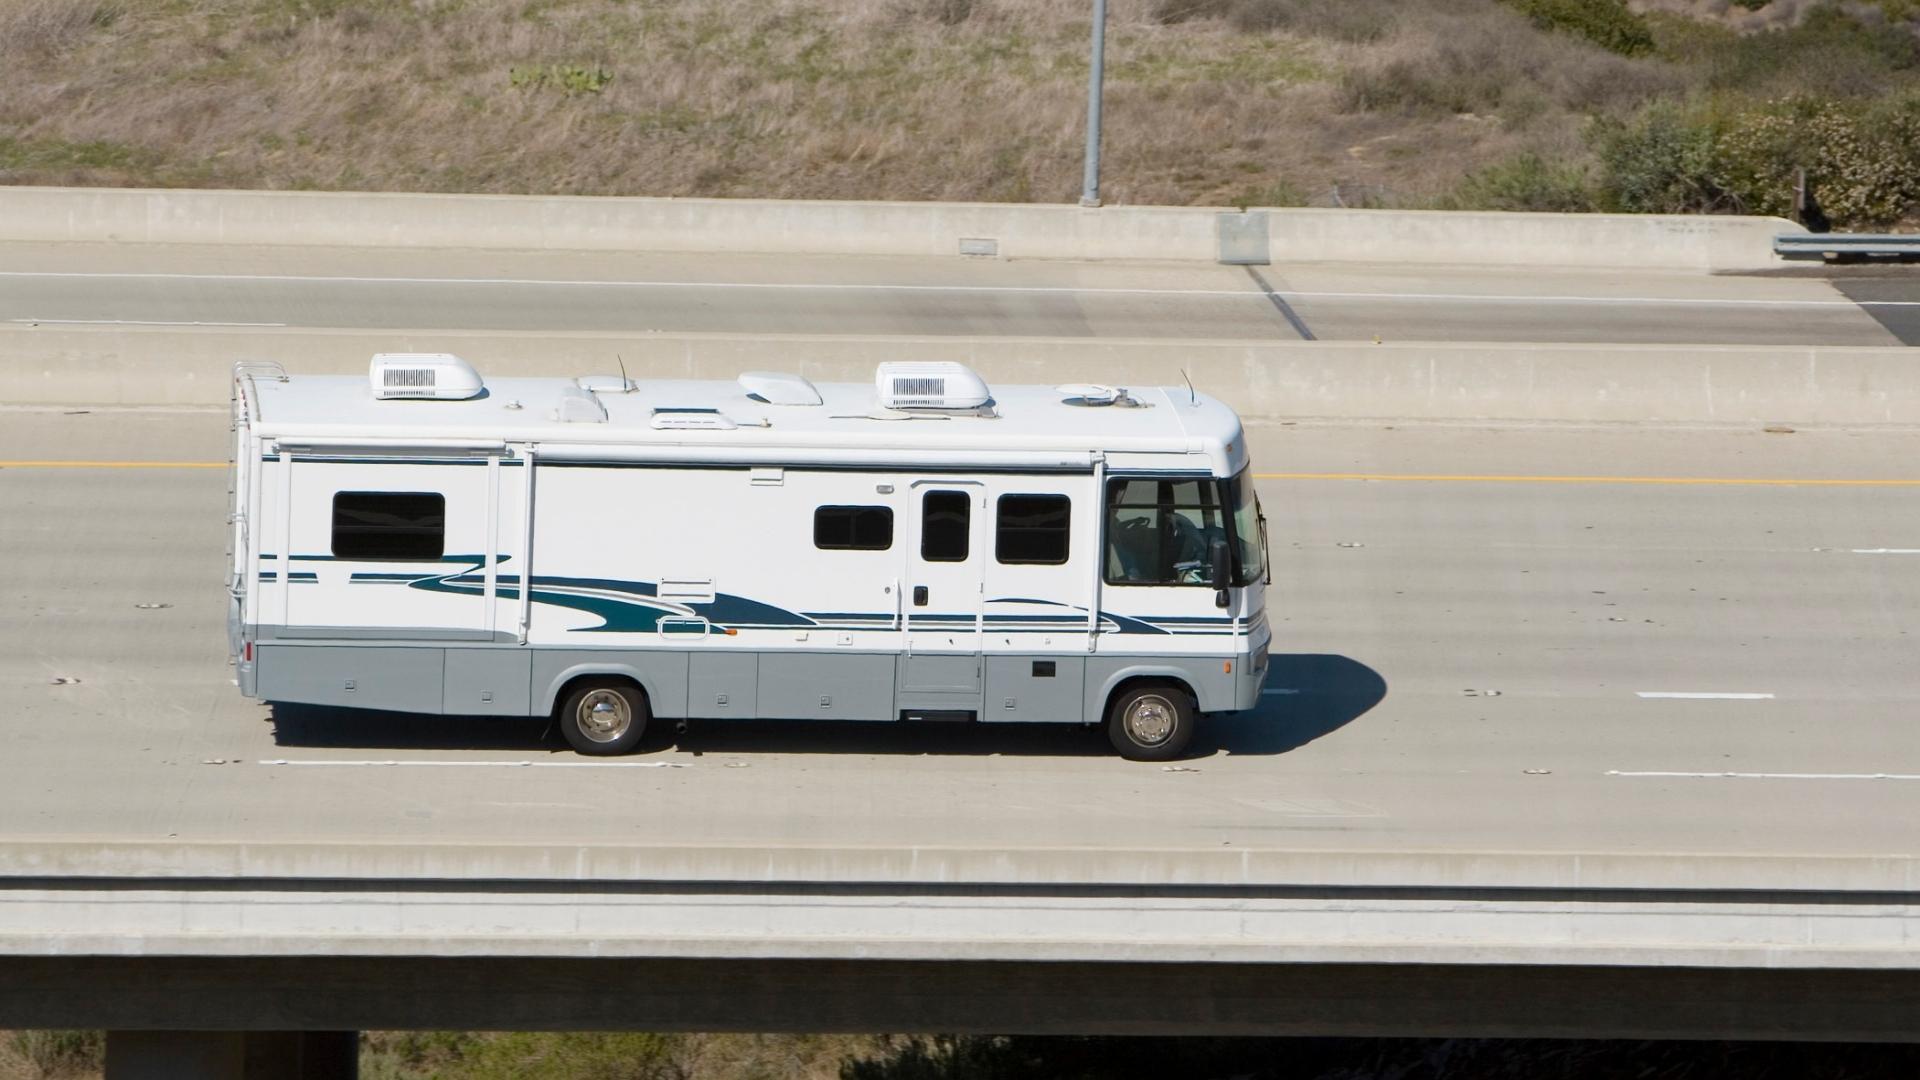 An RV traveling along the highway